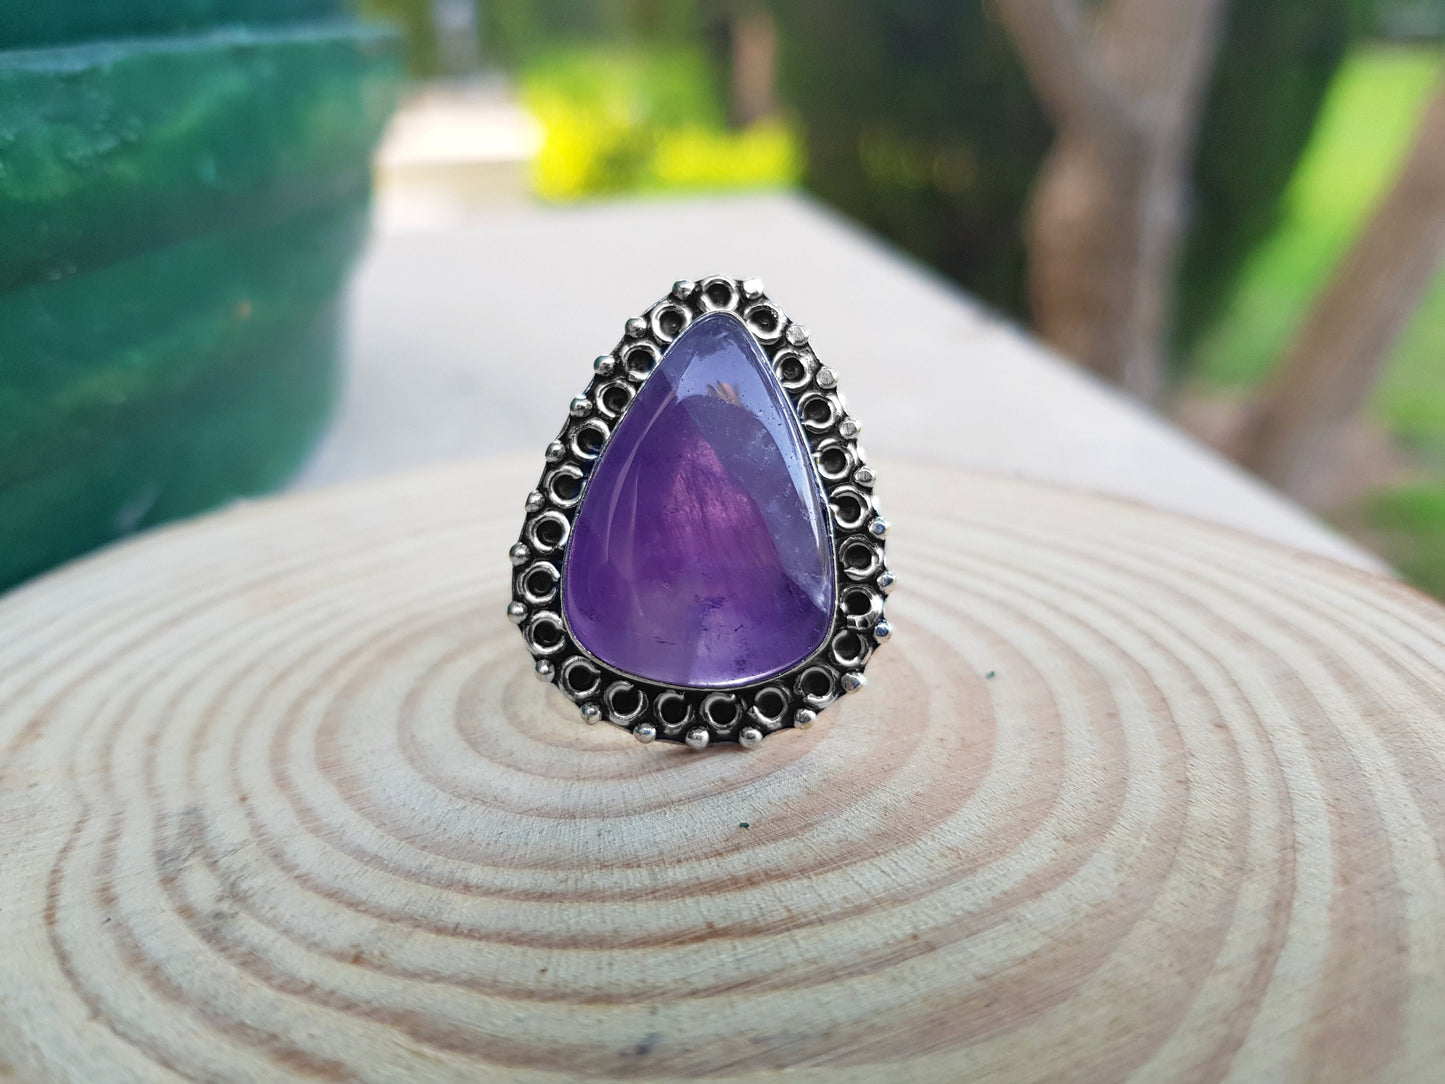 Amethyst Gemstone Ring Big Statement Ring In Sterling Silver Boho Ring Size US 8 3/4 One Of A Kind Gift Unique Jewellery